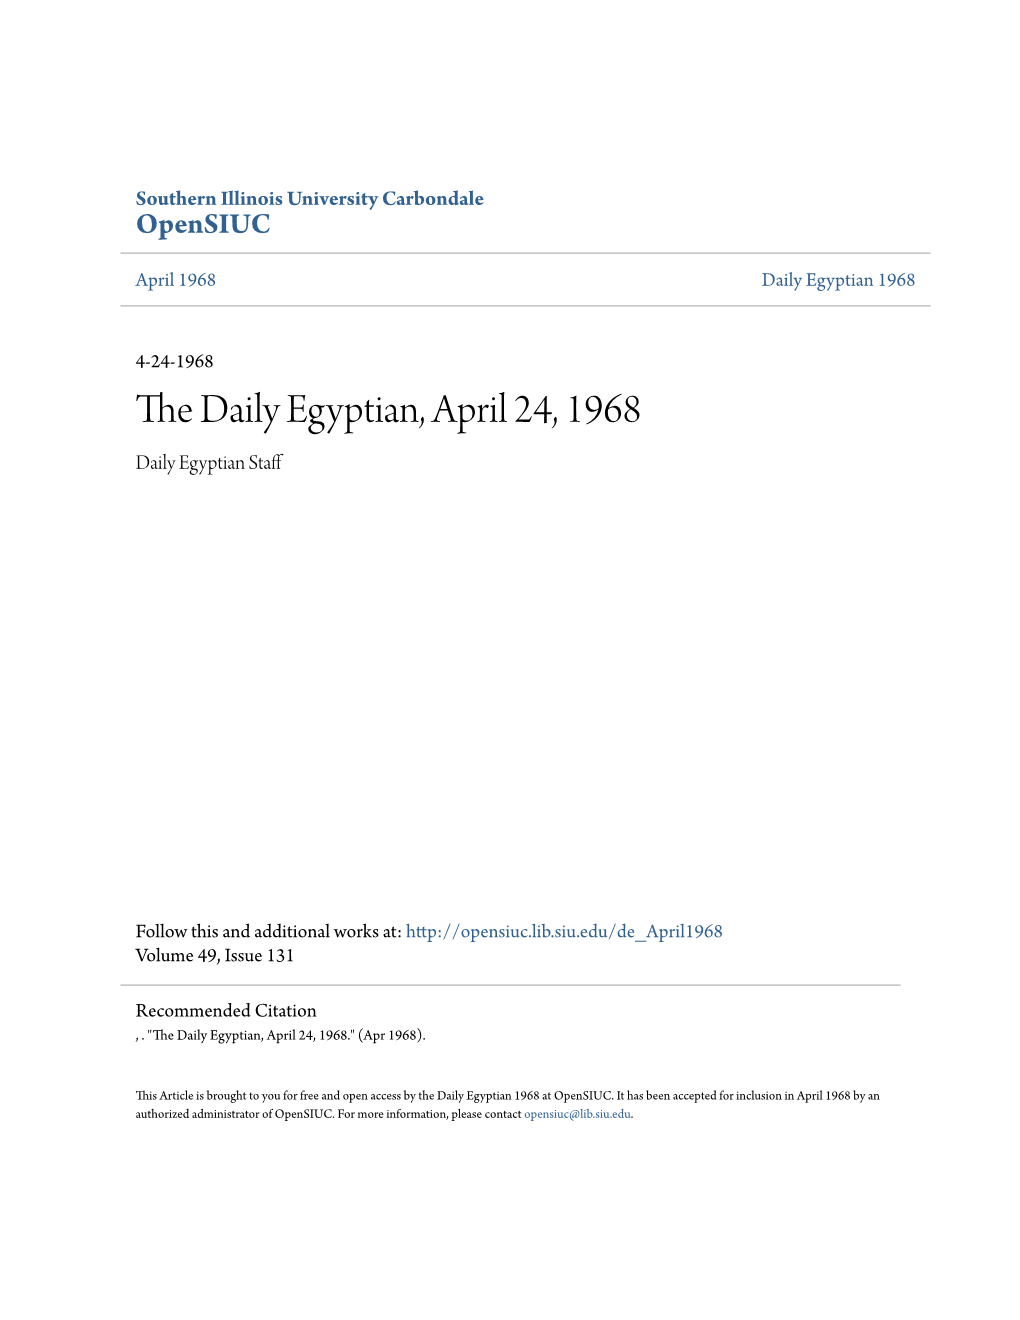 The Daily Egyptian, April 24, 1968